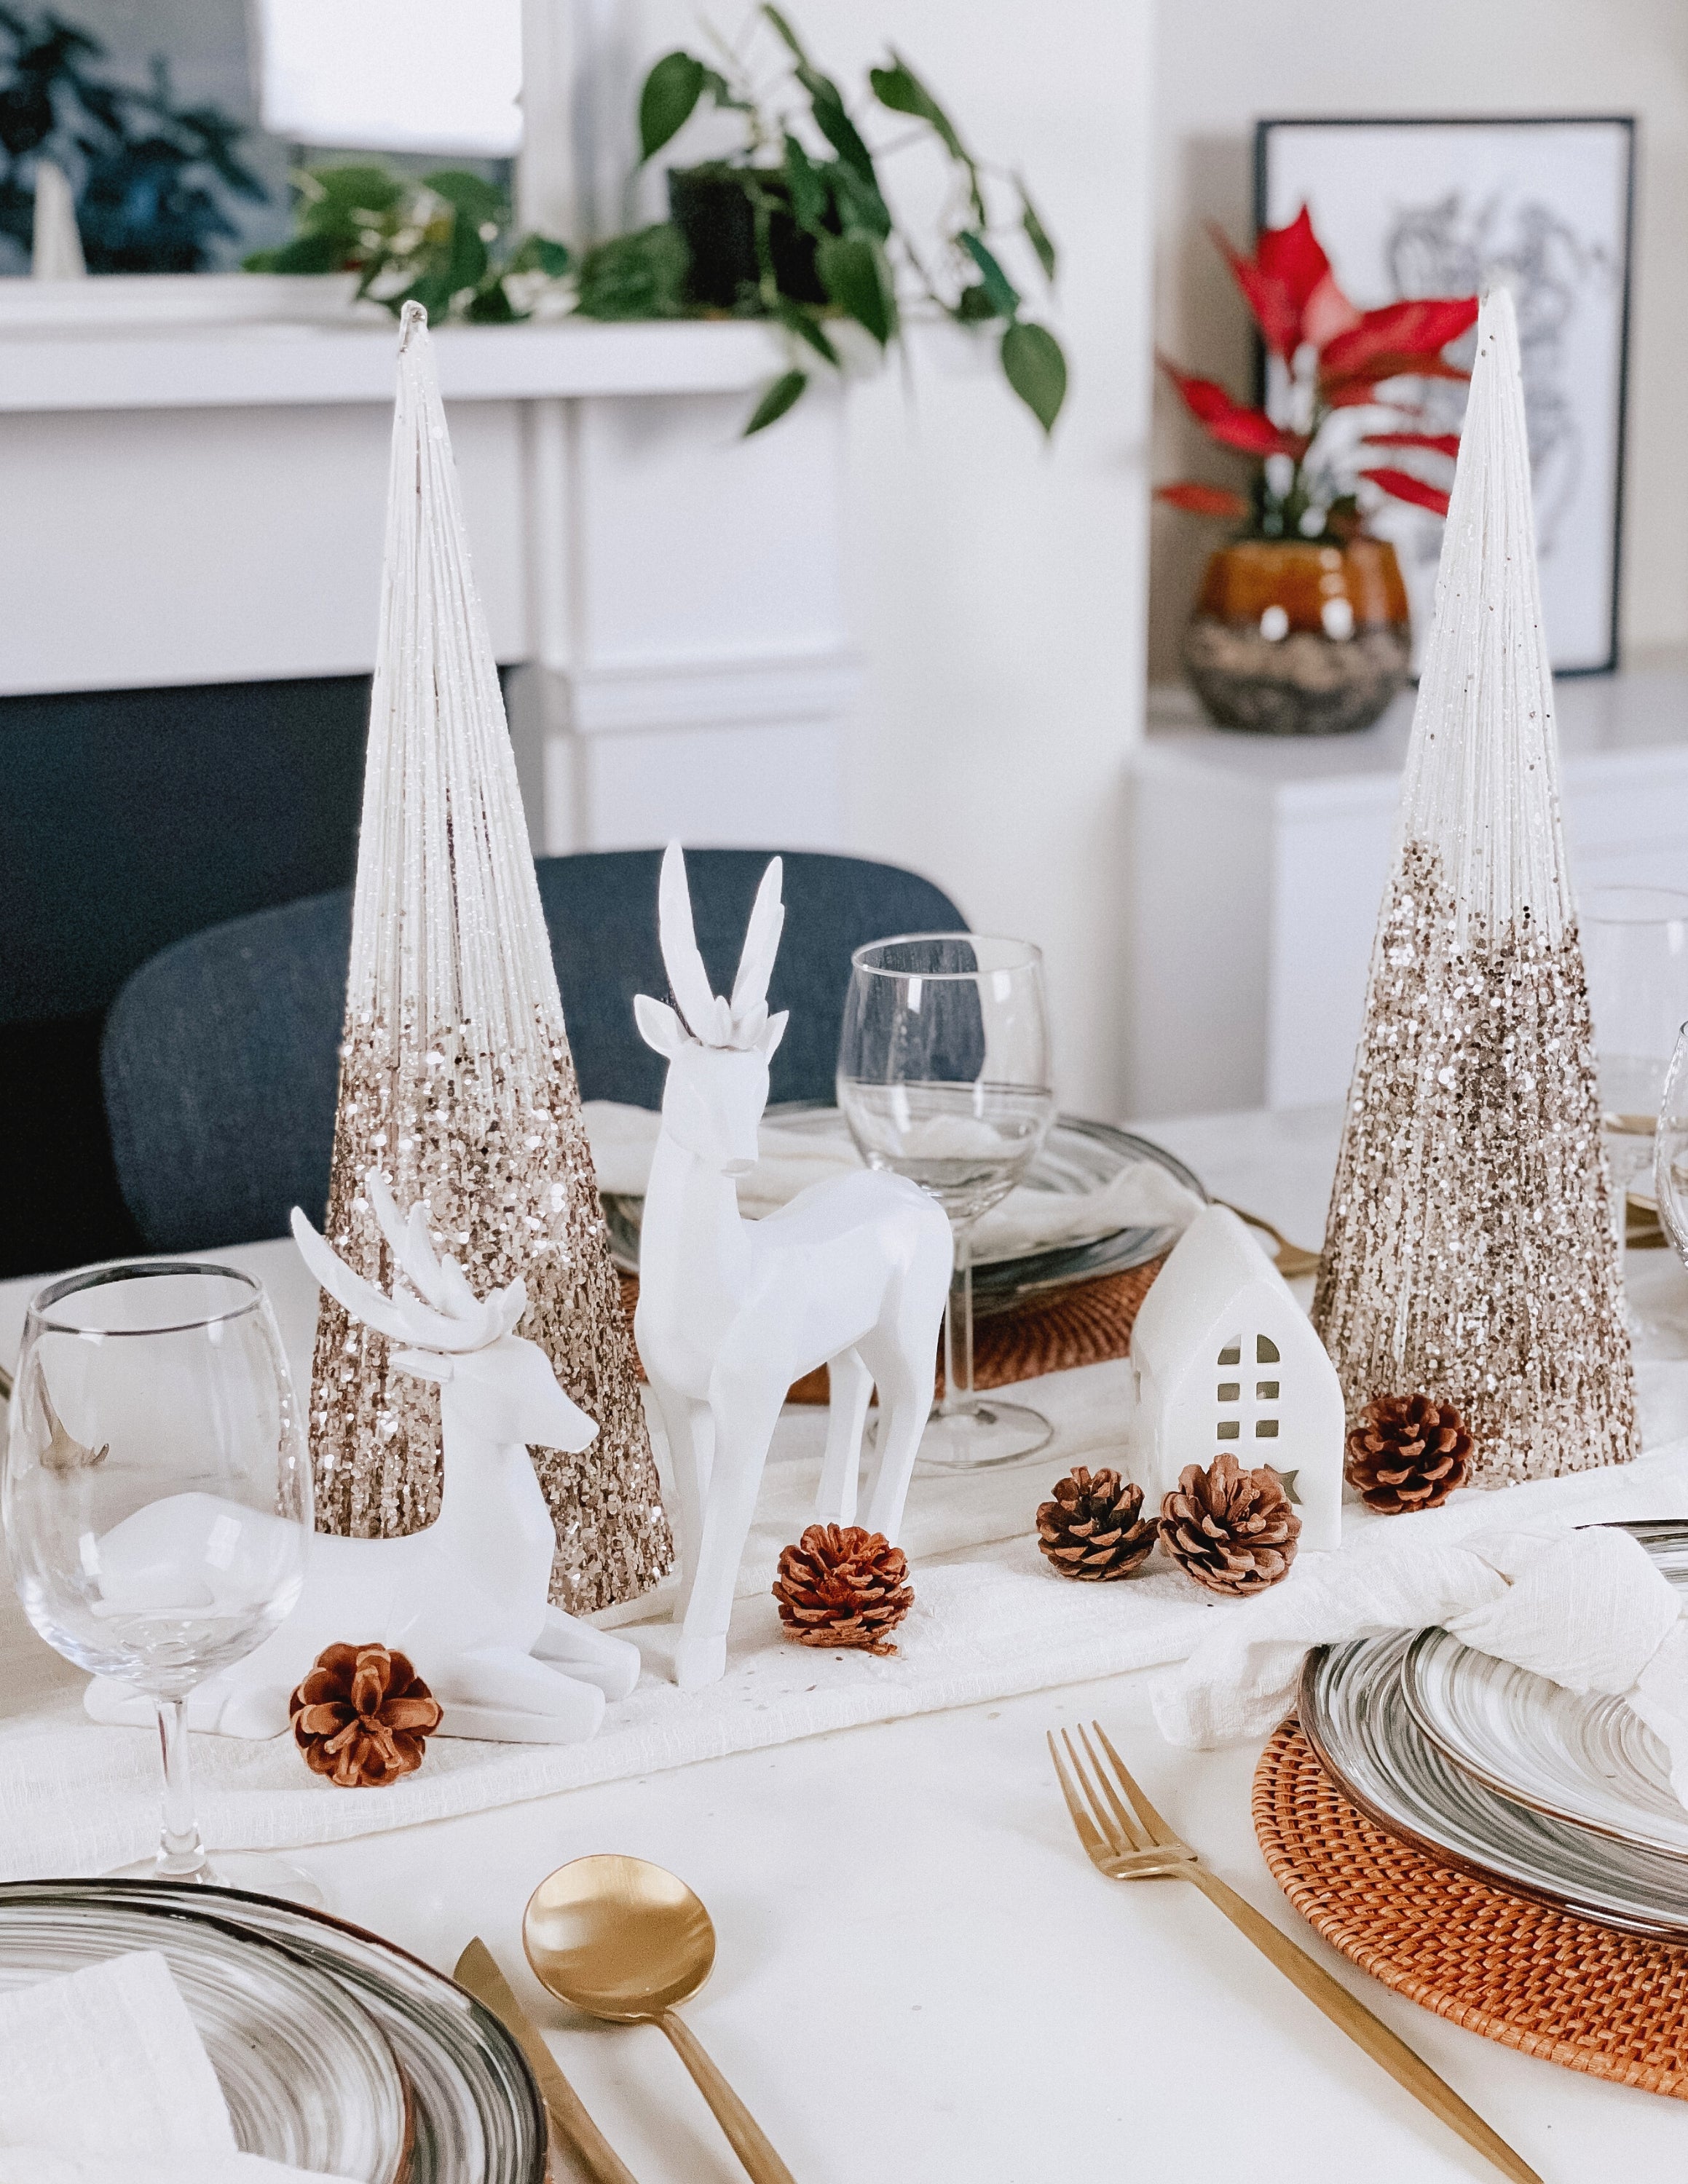 What a Host Home Decor: Christmas Tablescape With Geometric Decorative Christmas Deers, Scandi Houses, Rattan Placemats, White and Gold Christmas Table Pine Trees, Porcelain Plates Set Tableware, Gold Cutlery Stainless Steel Set and Rustic Cotton Gauze Table Textiles